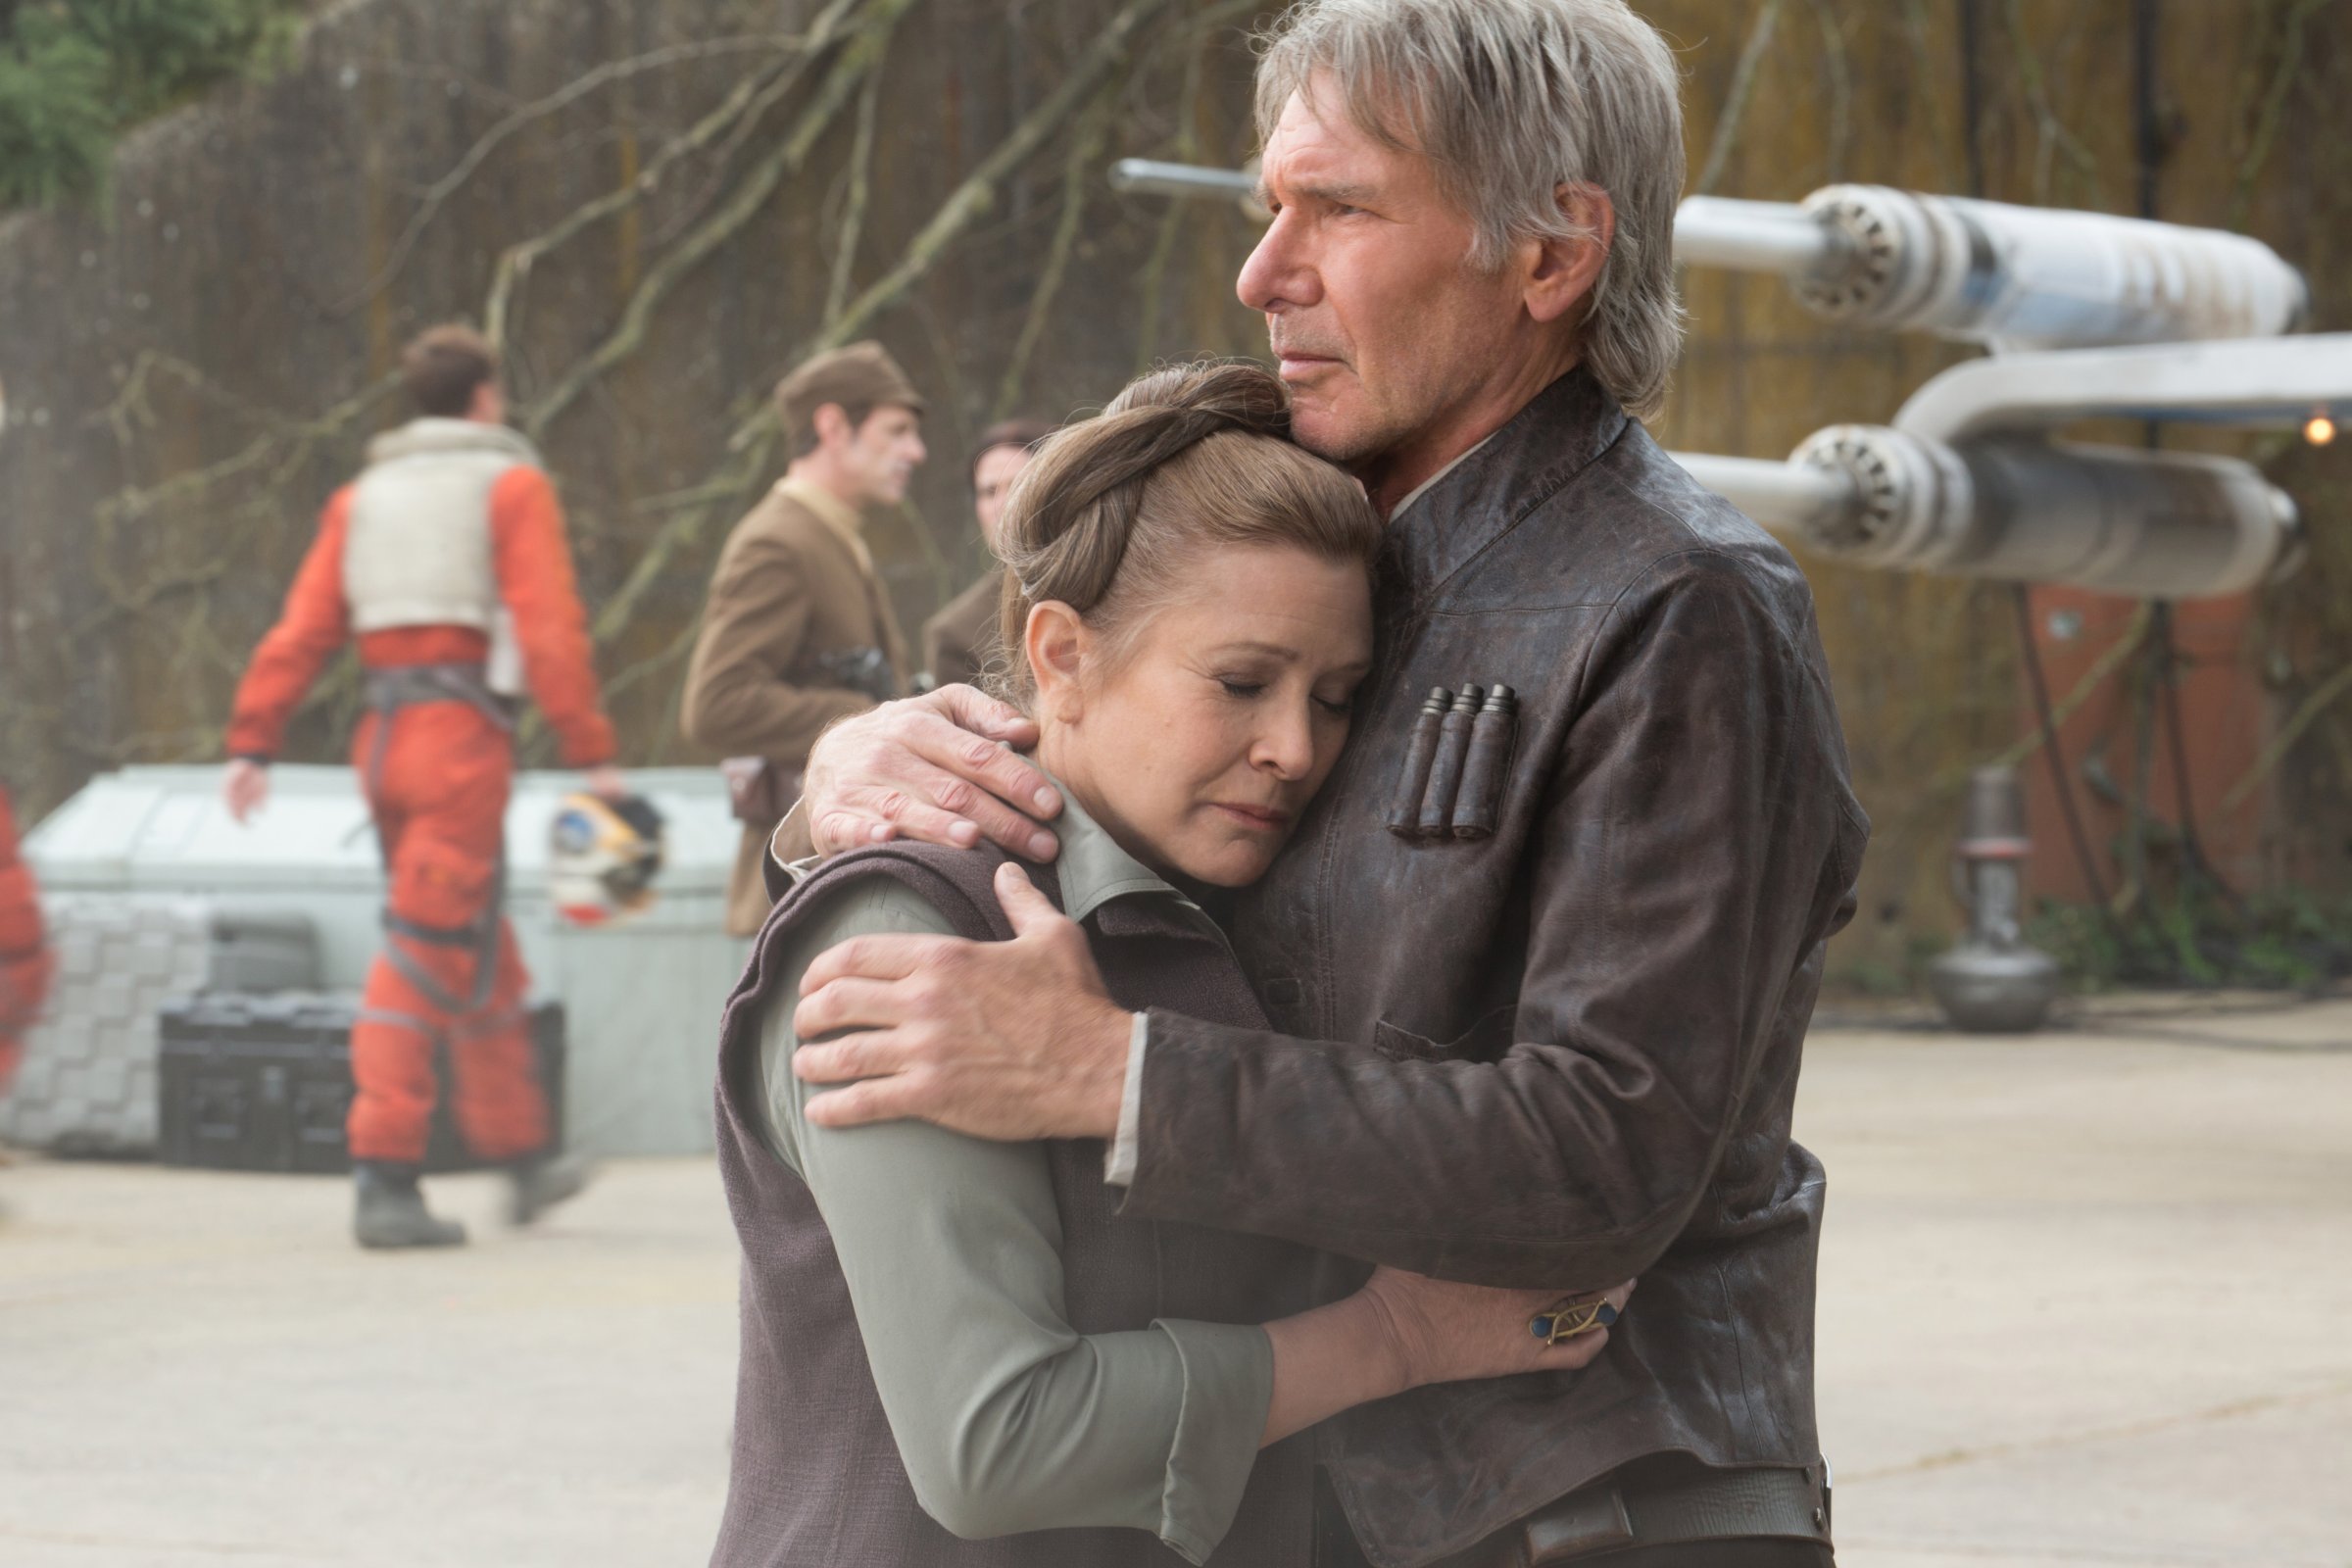 Harrison Ford as Han Solo and Carrie Fisher as General Leia Organa in Star Wars: The Force Awakens.